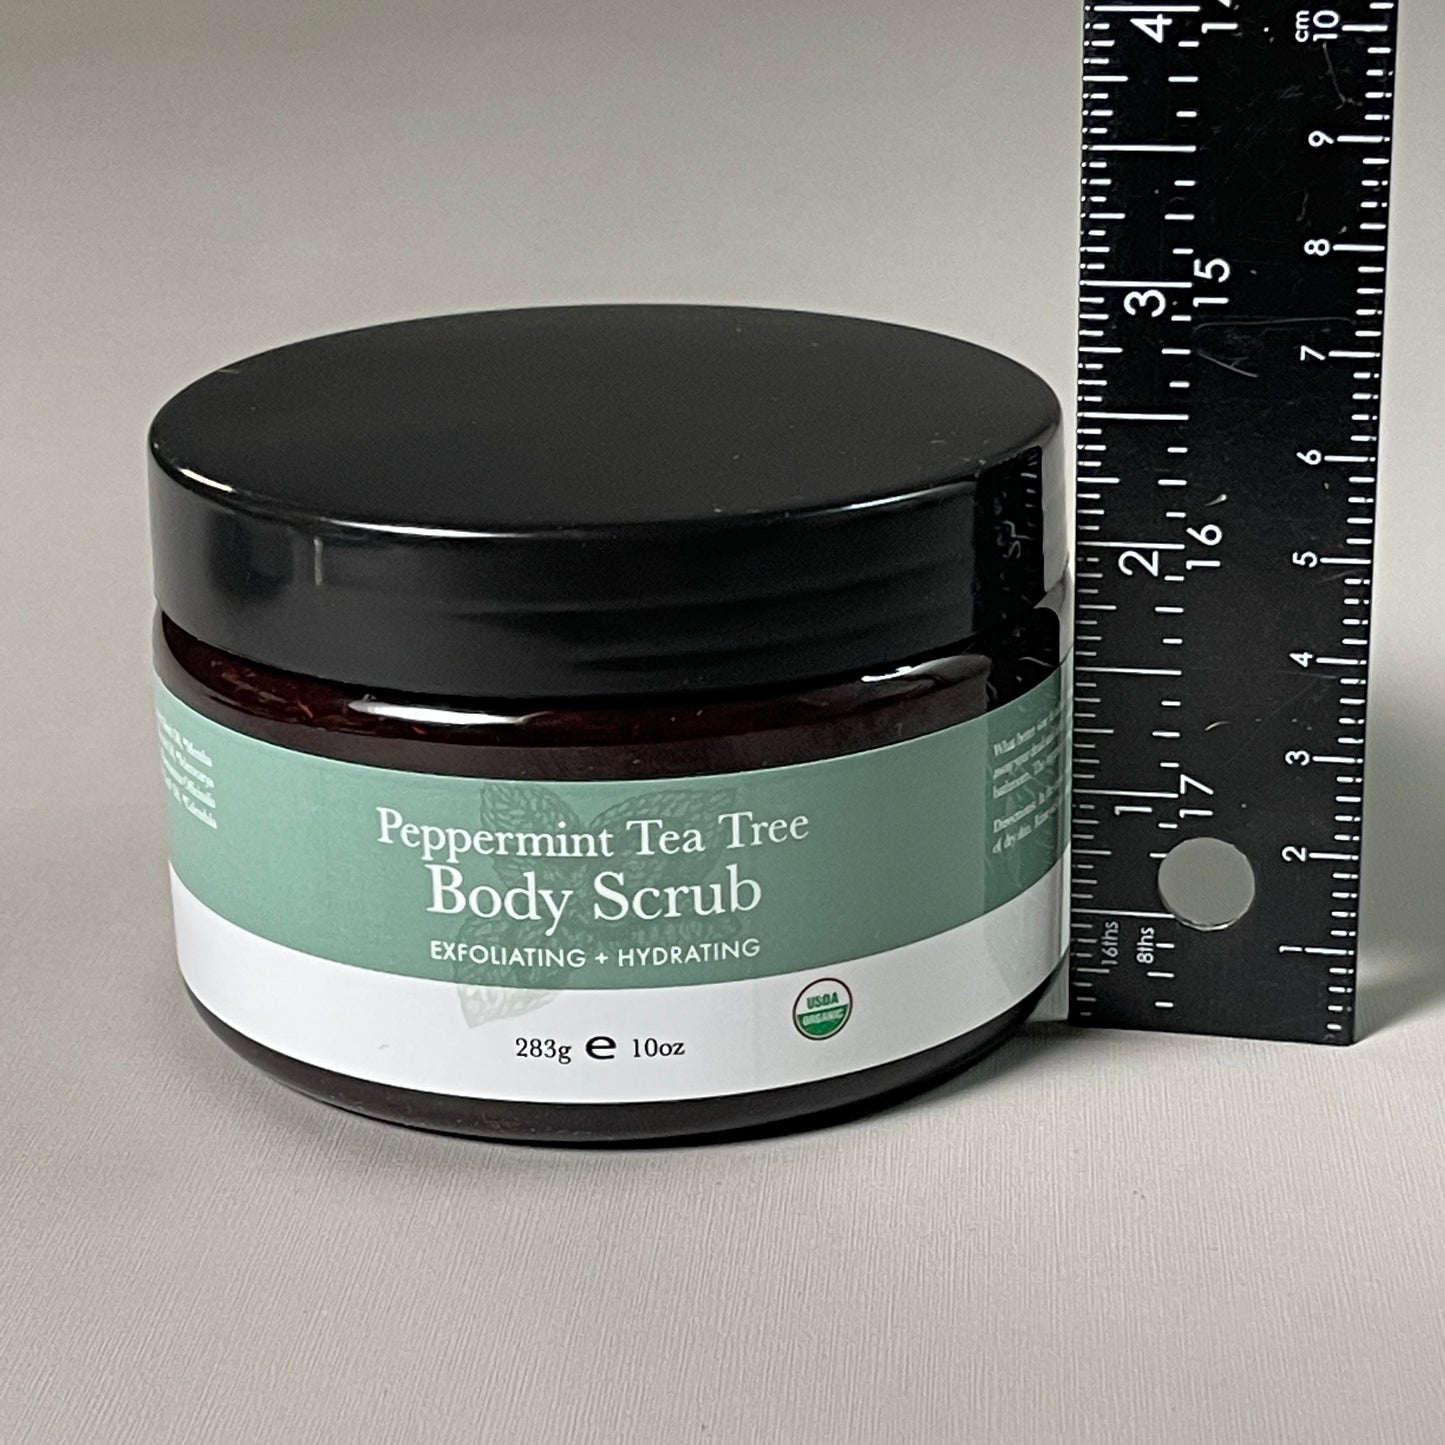 BEAUTY BY EARTH 6-PACK! Peppermint Tea Tree Body Scrub (Exfoliate, Smoothing) 10 oz BB 10/23